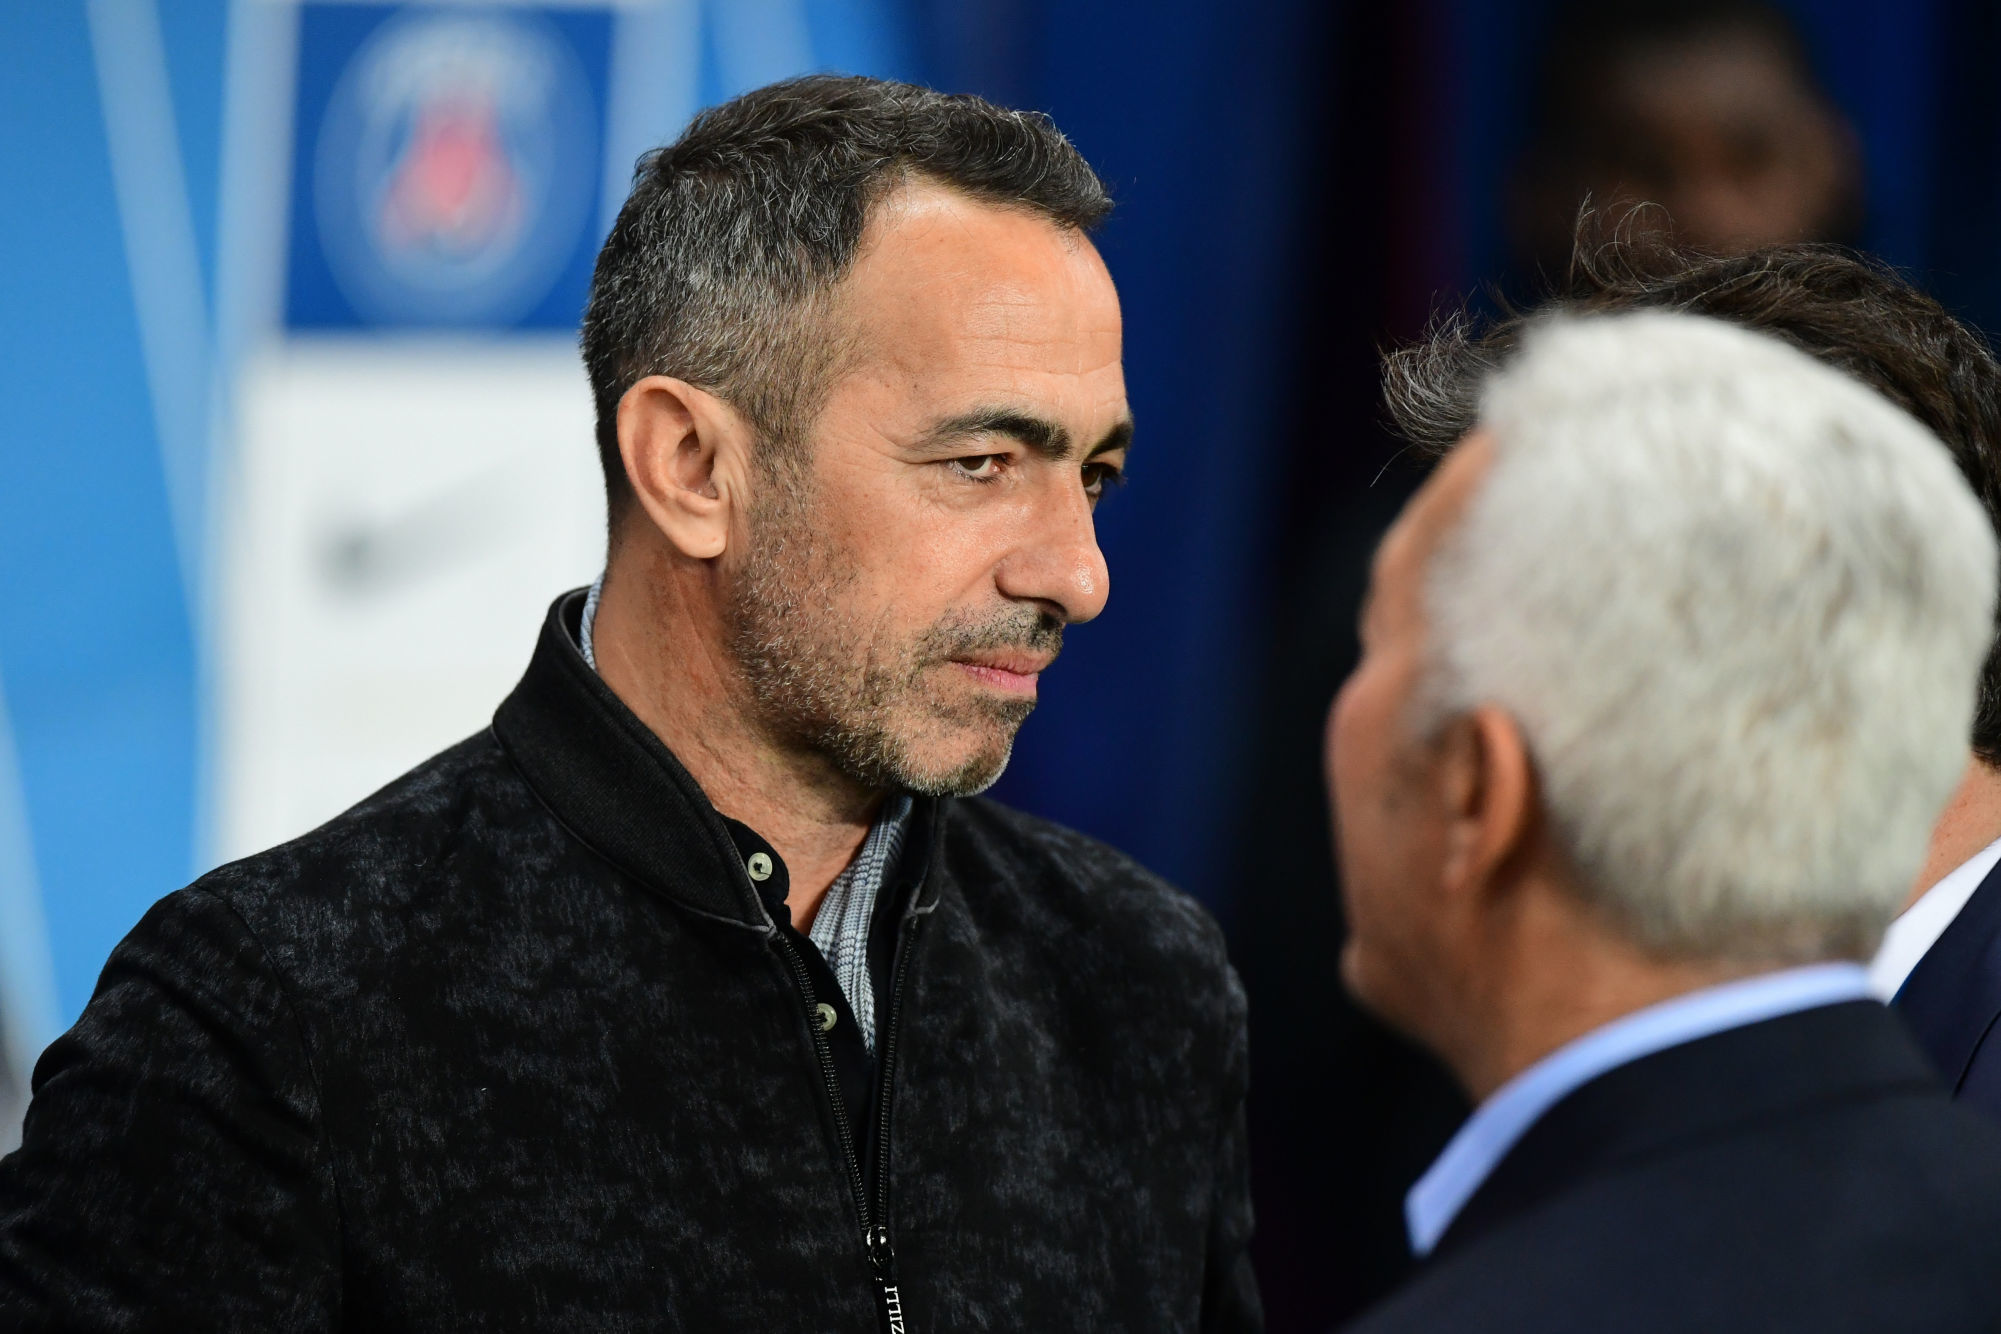 Former PSG player Jean DJORKAEFF (right) and his son, former PSG player Youri DJORKAEFF (left), during the Ligue 1 match between Paris Saint Germain and Marseille at Parc des Princes on October 27, 2019 in Paris, France. (Photo by Dave Winter/Icon Sport) - Youri DJORKAEFF - Jean DJORKAEFF - Parc des Princes - Paris (France)